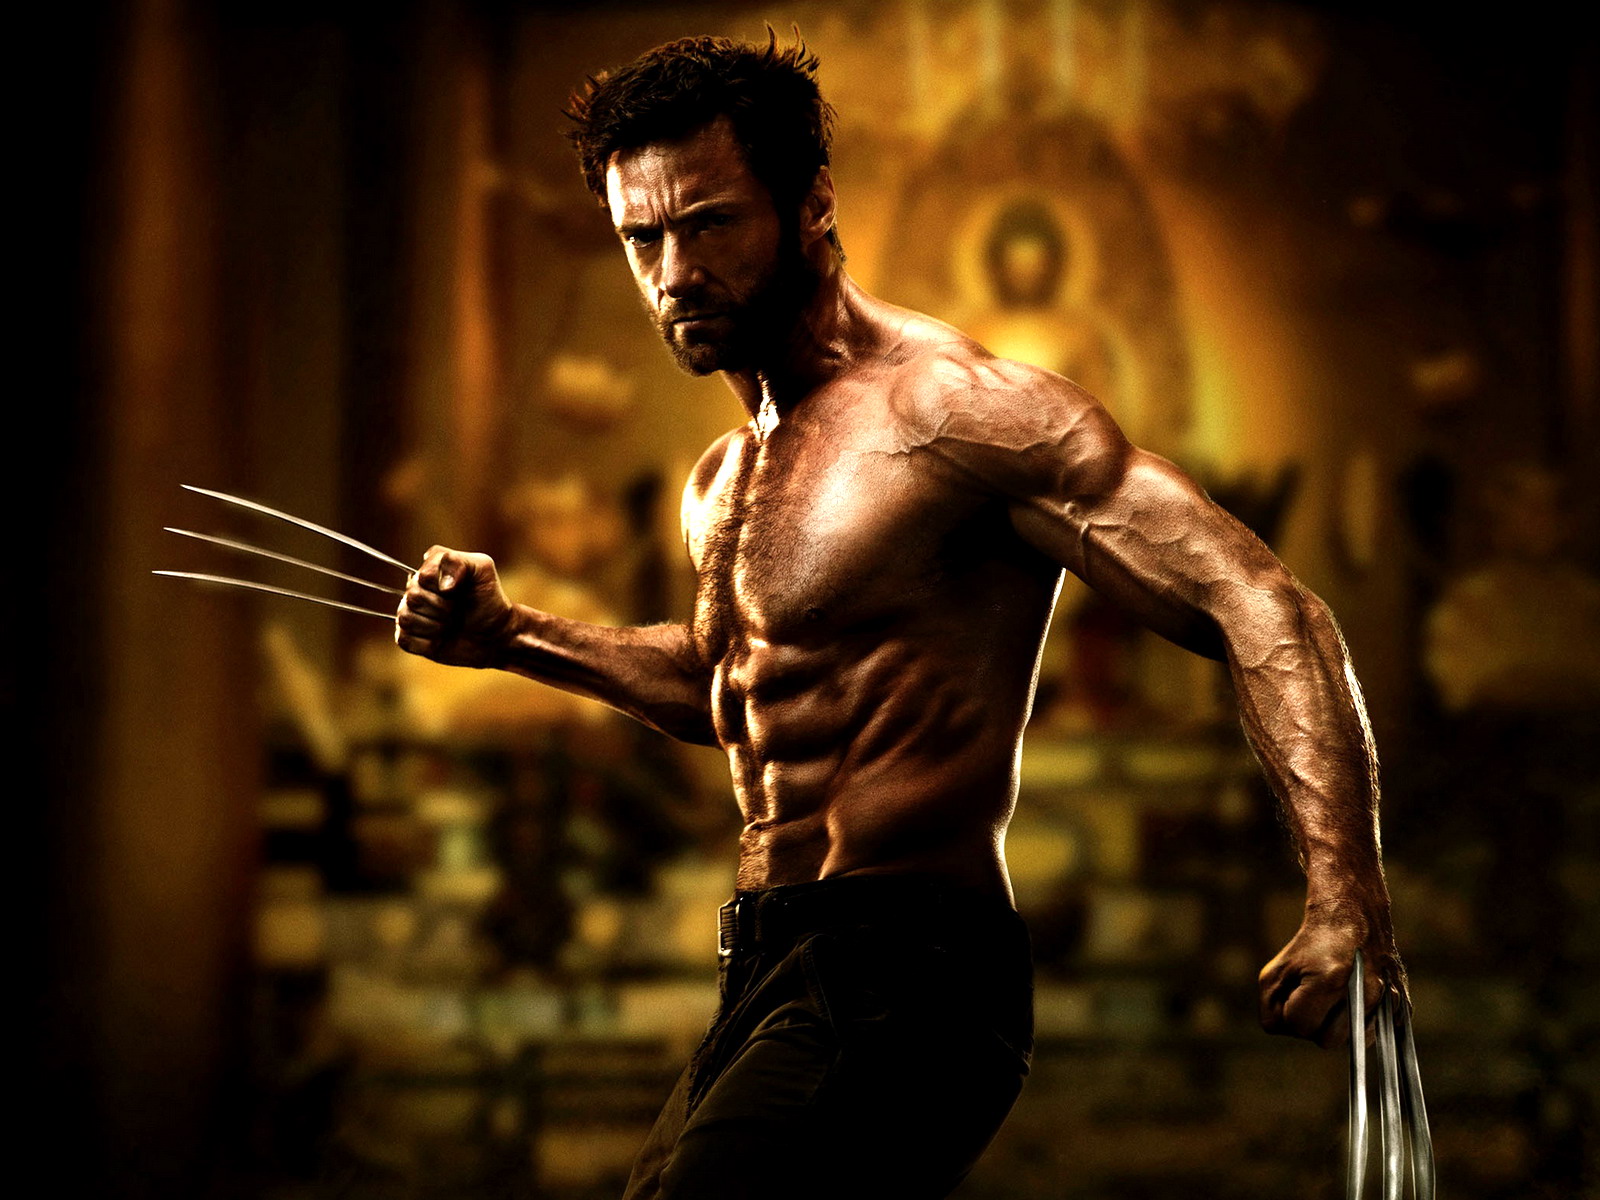 Download full size The Wolverine wallpaper / Movies / 1600x1200